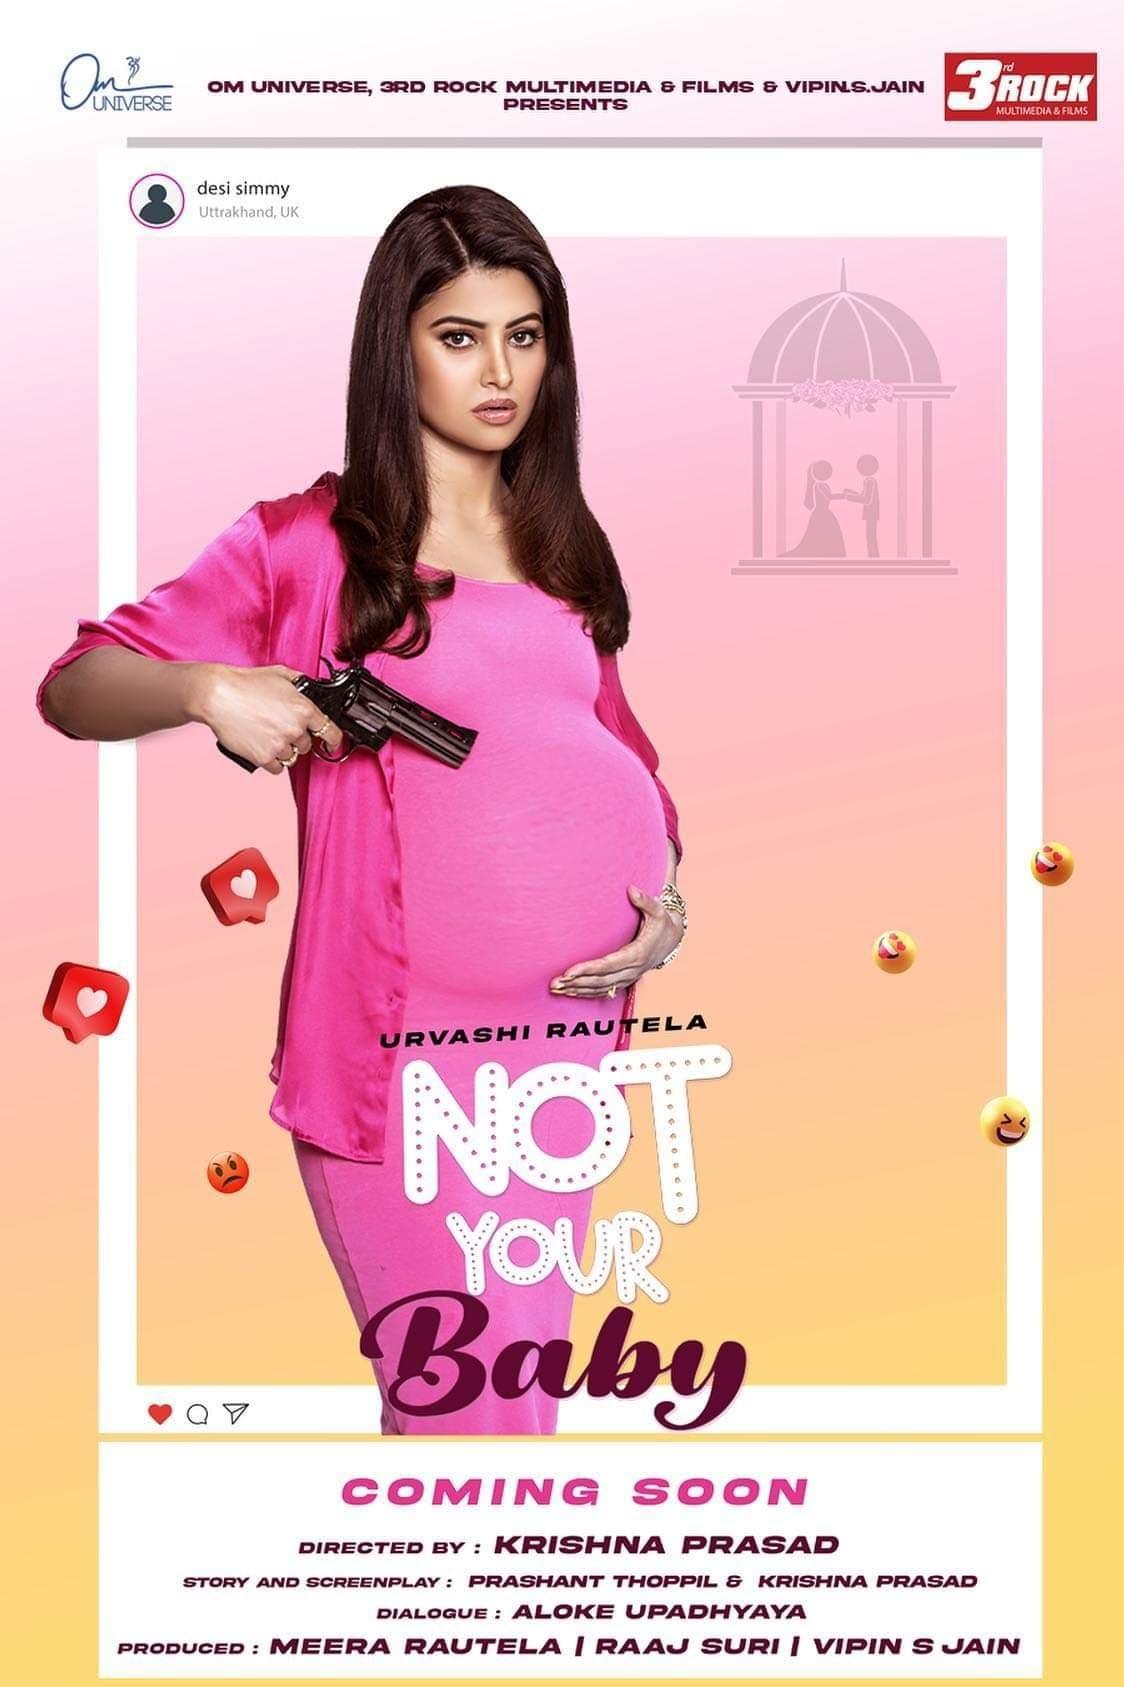 Not Your Baby poster